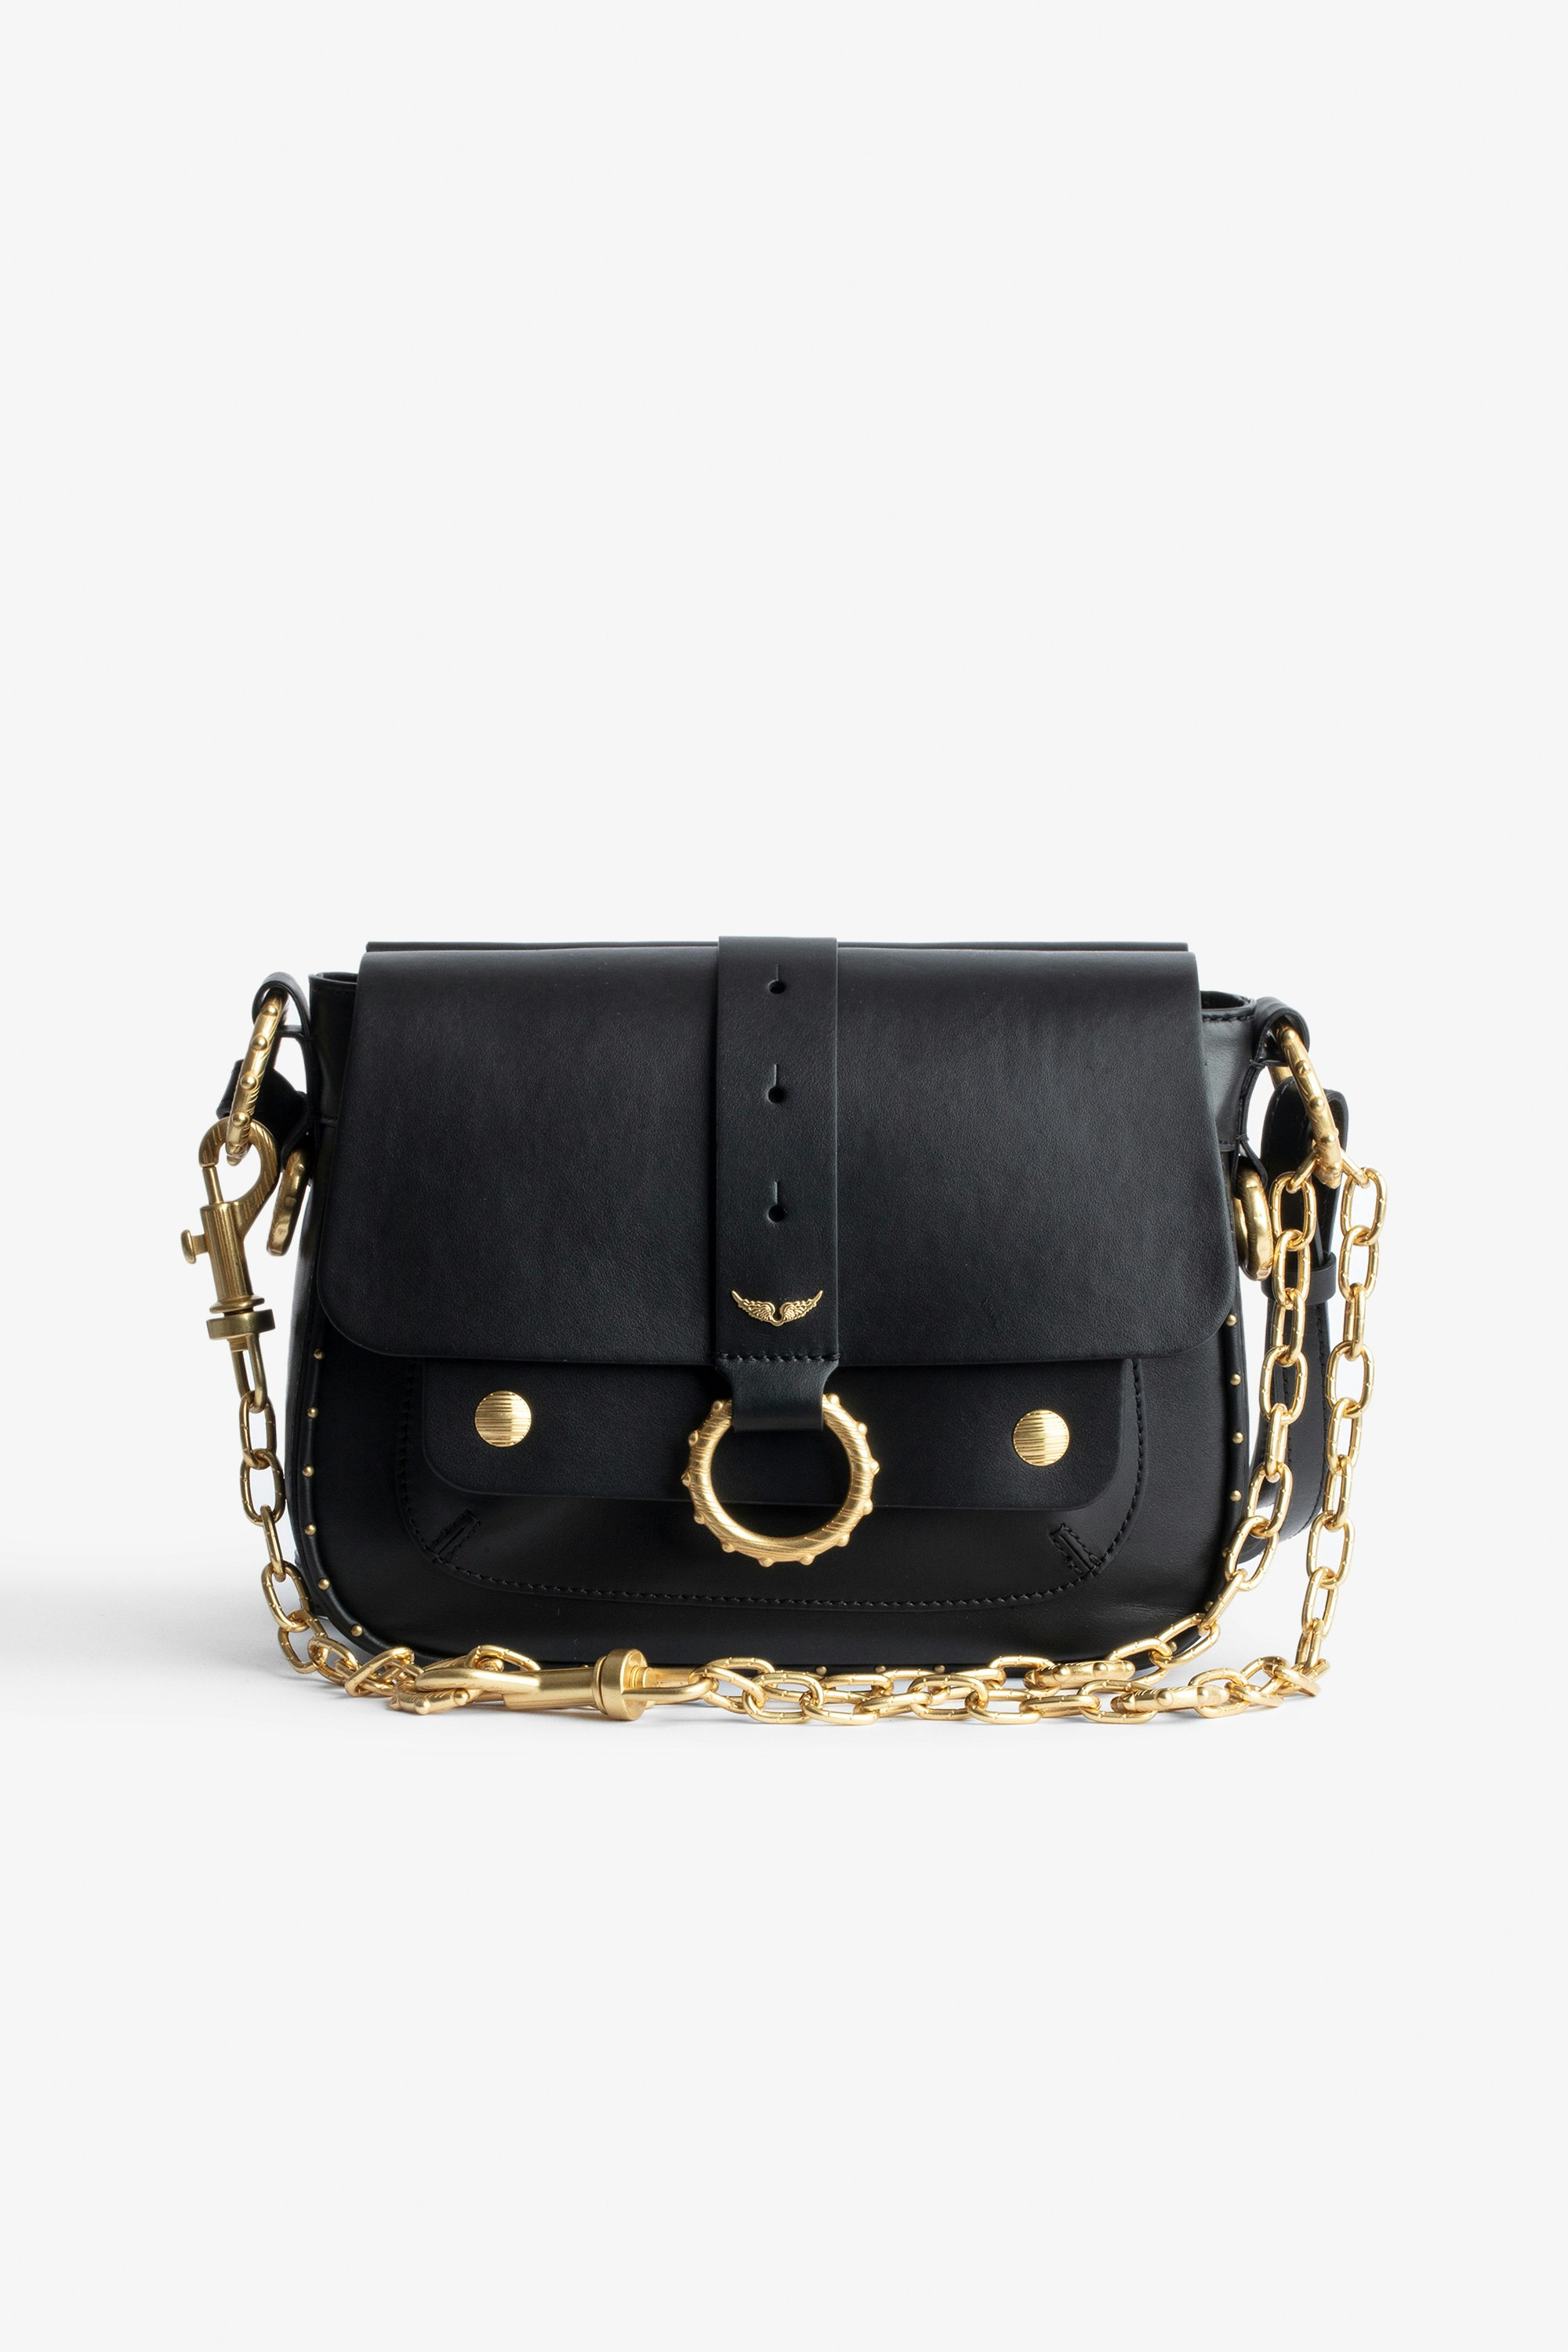 Kate Bag Women’s black grained leather bag with gold-toned chains.